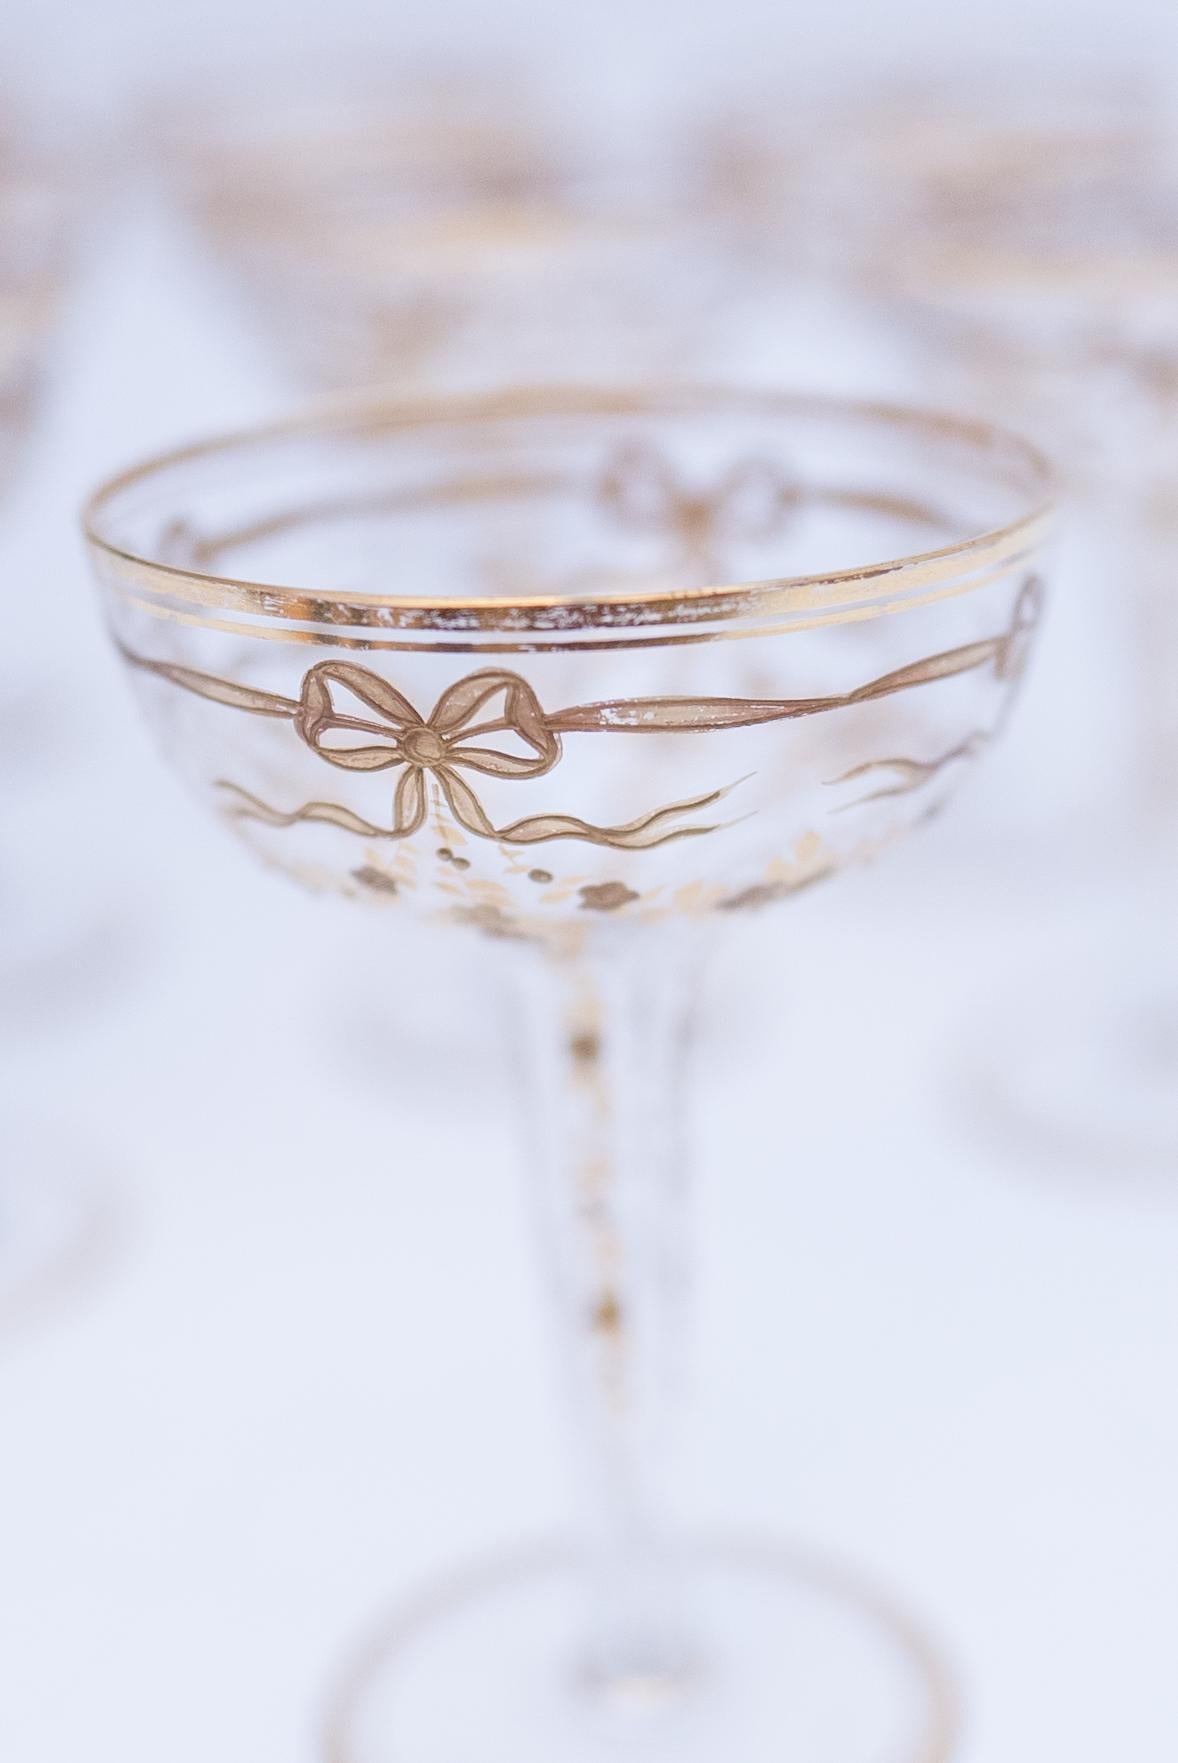 hollow stem coupe glasses